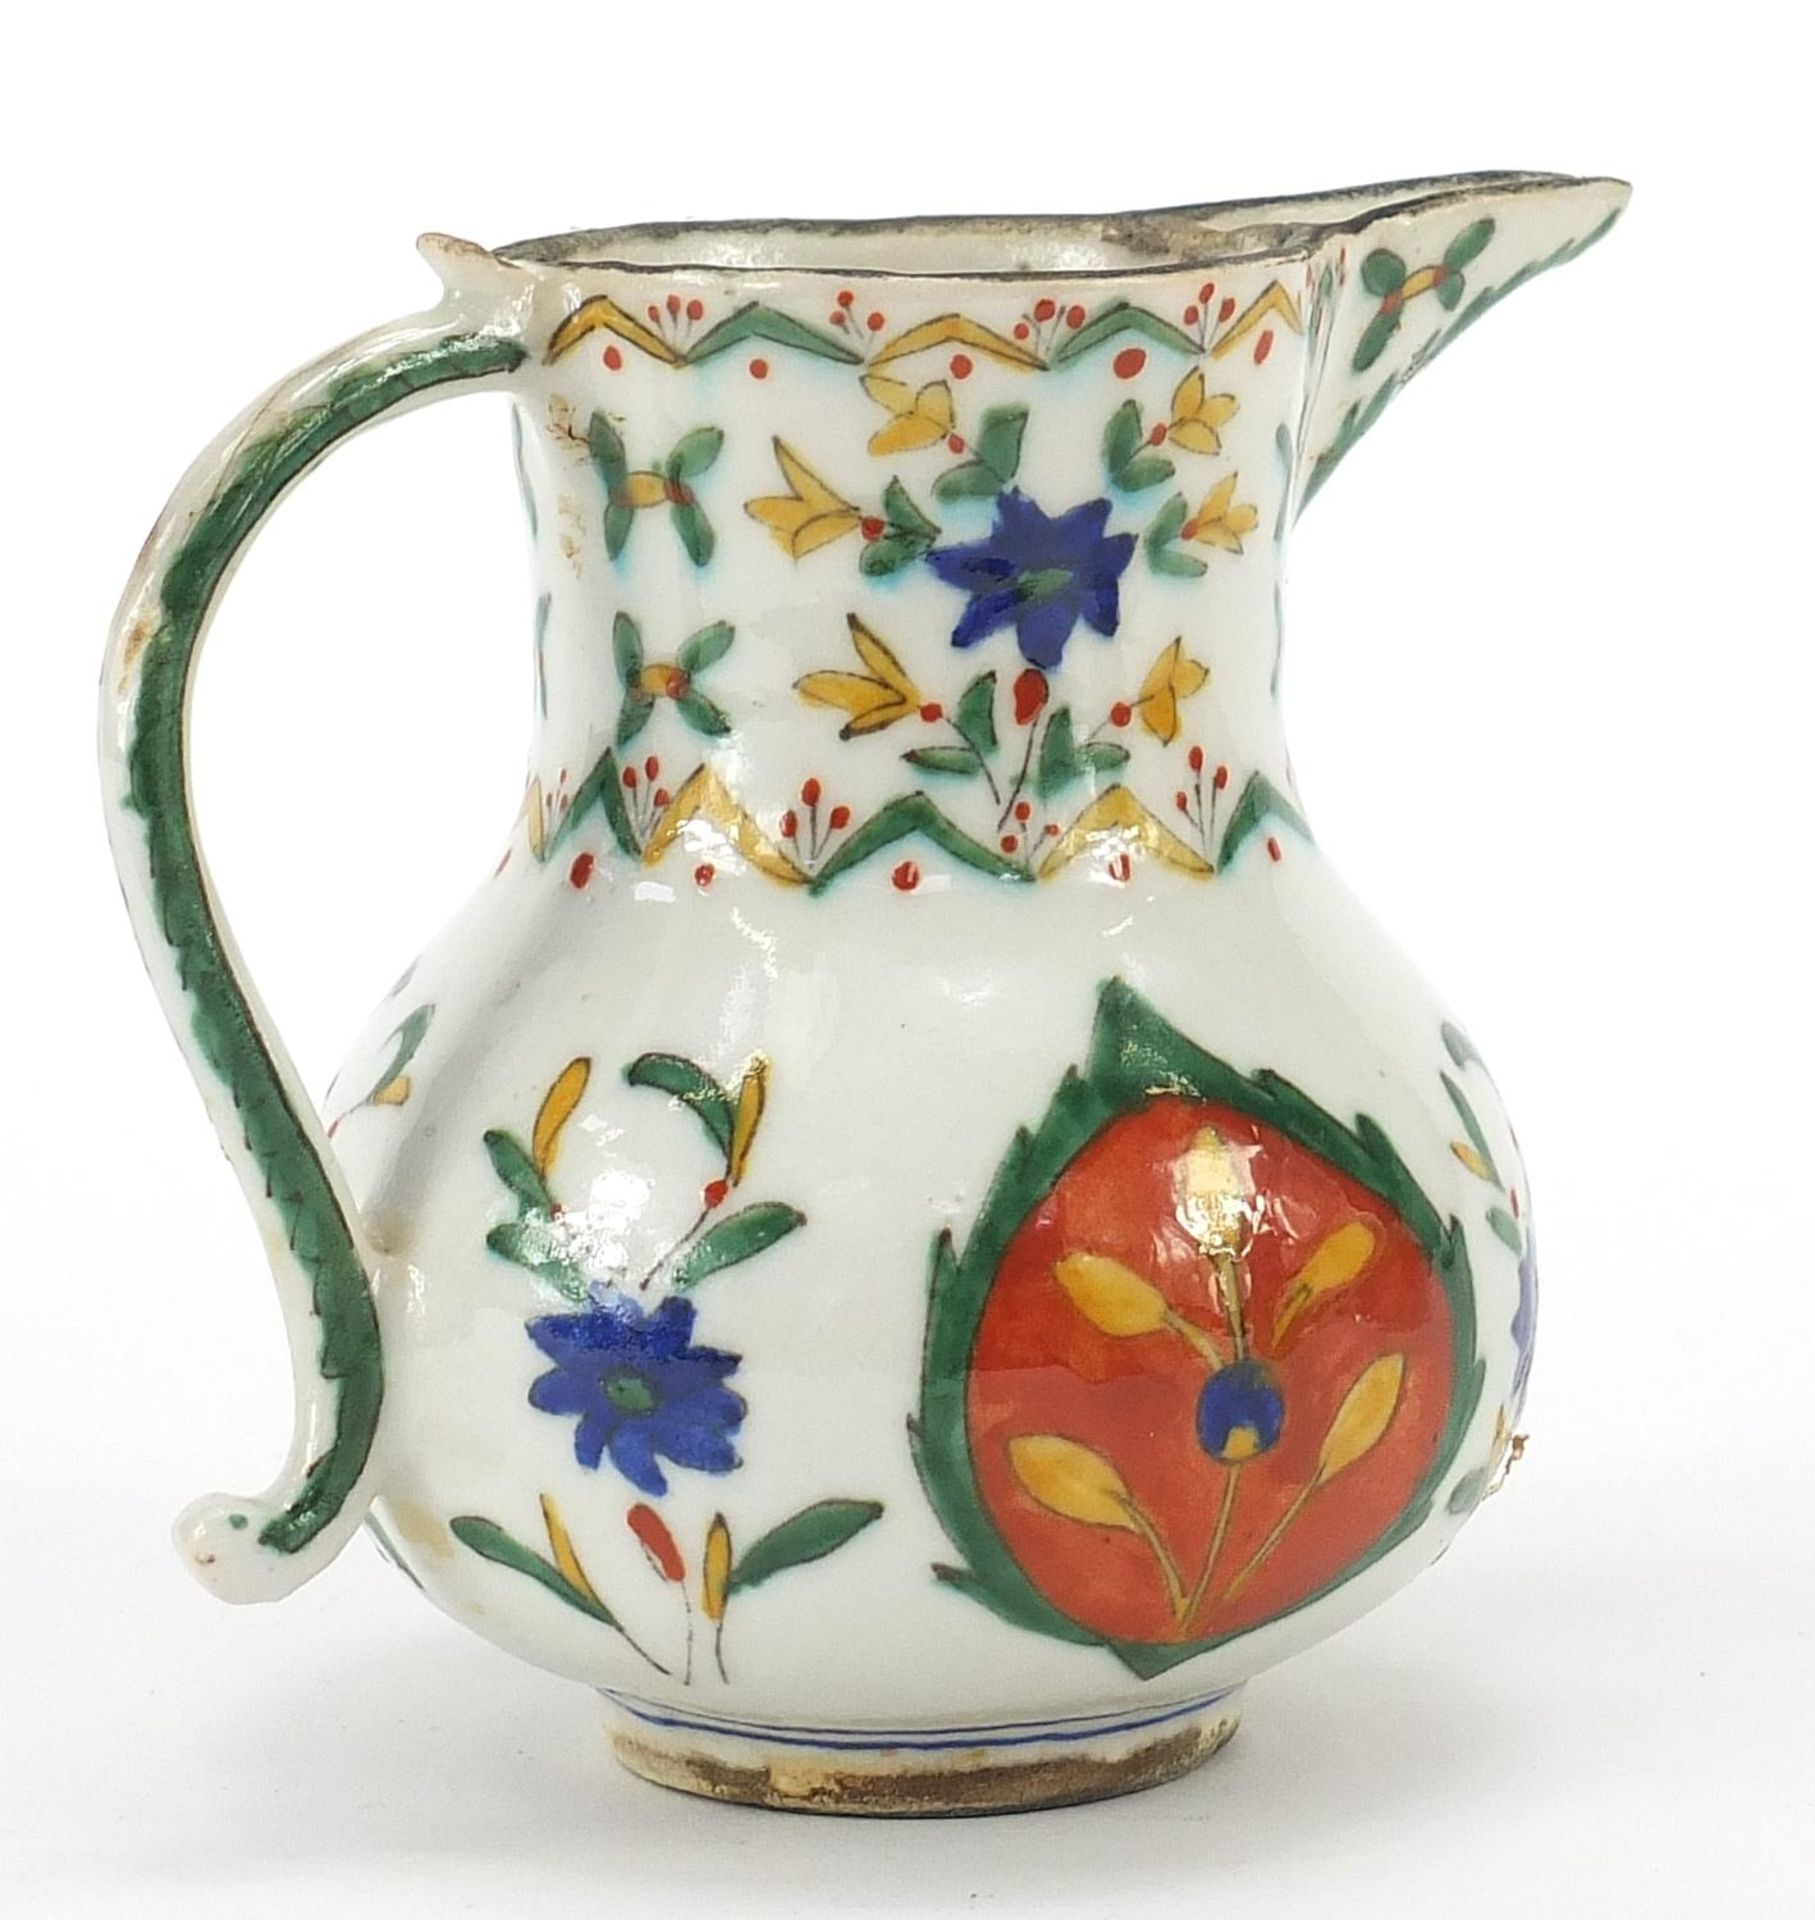 Turkish Kutahya pottery water jug hand painted with flowers, 12.5cm high - Image 2 of 3